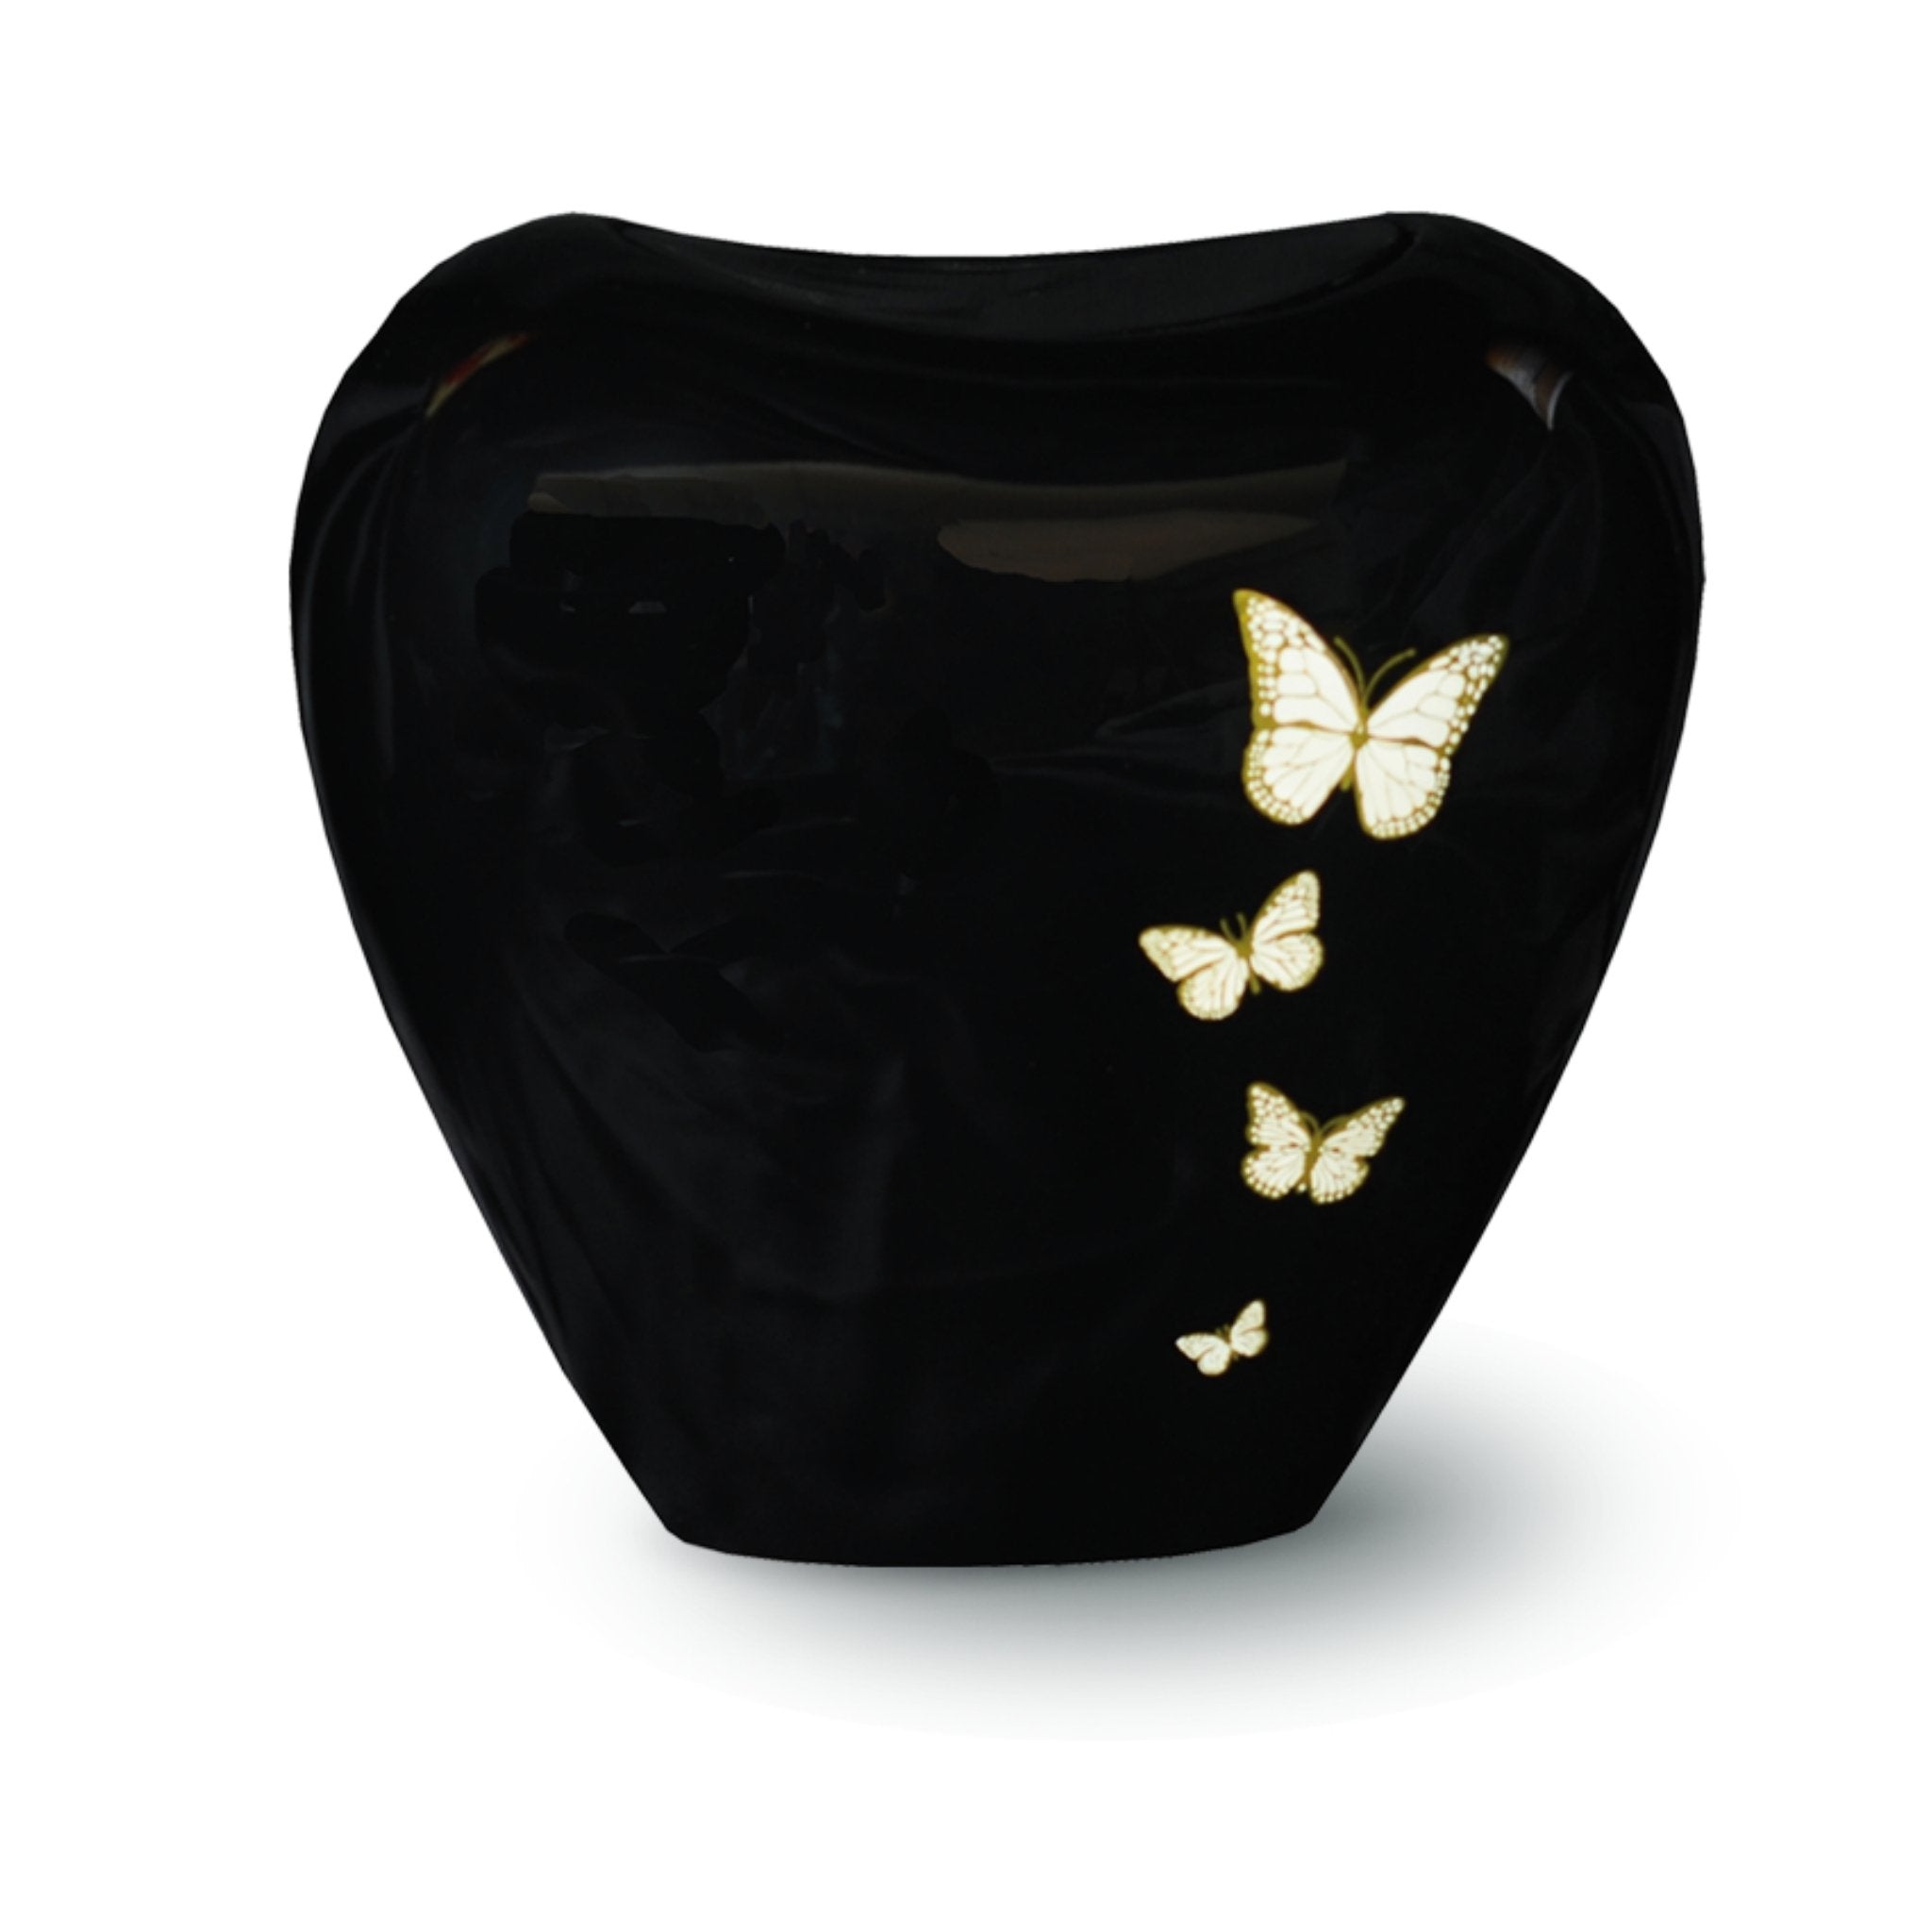 Ashill Adult Cremation Ashes Urn DEL